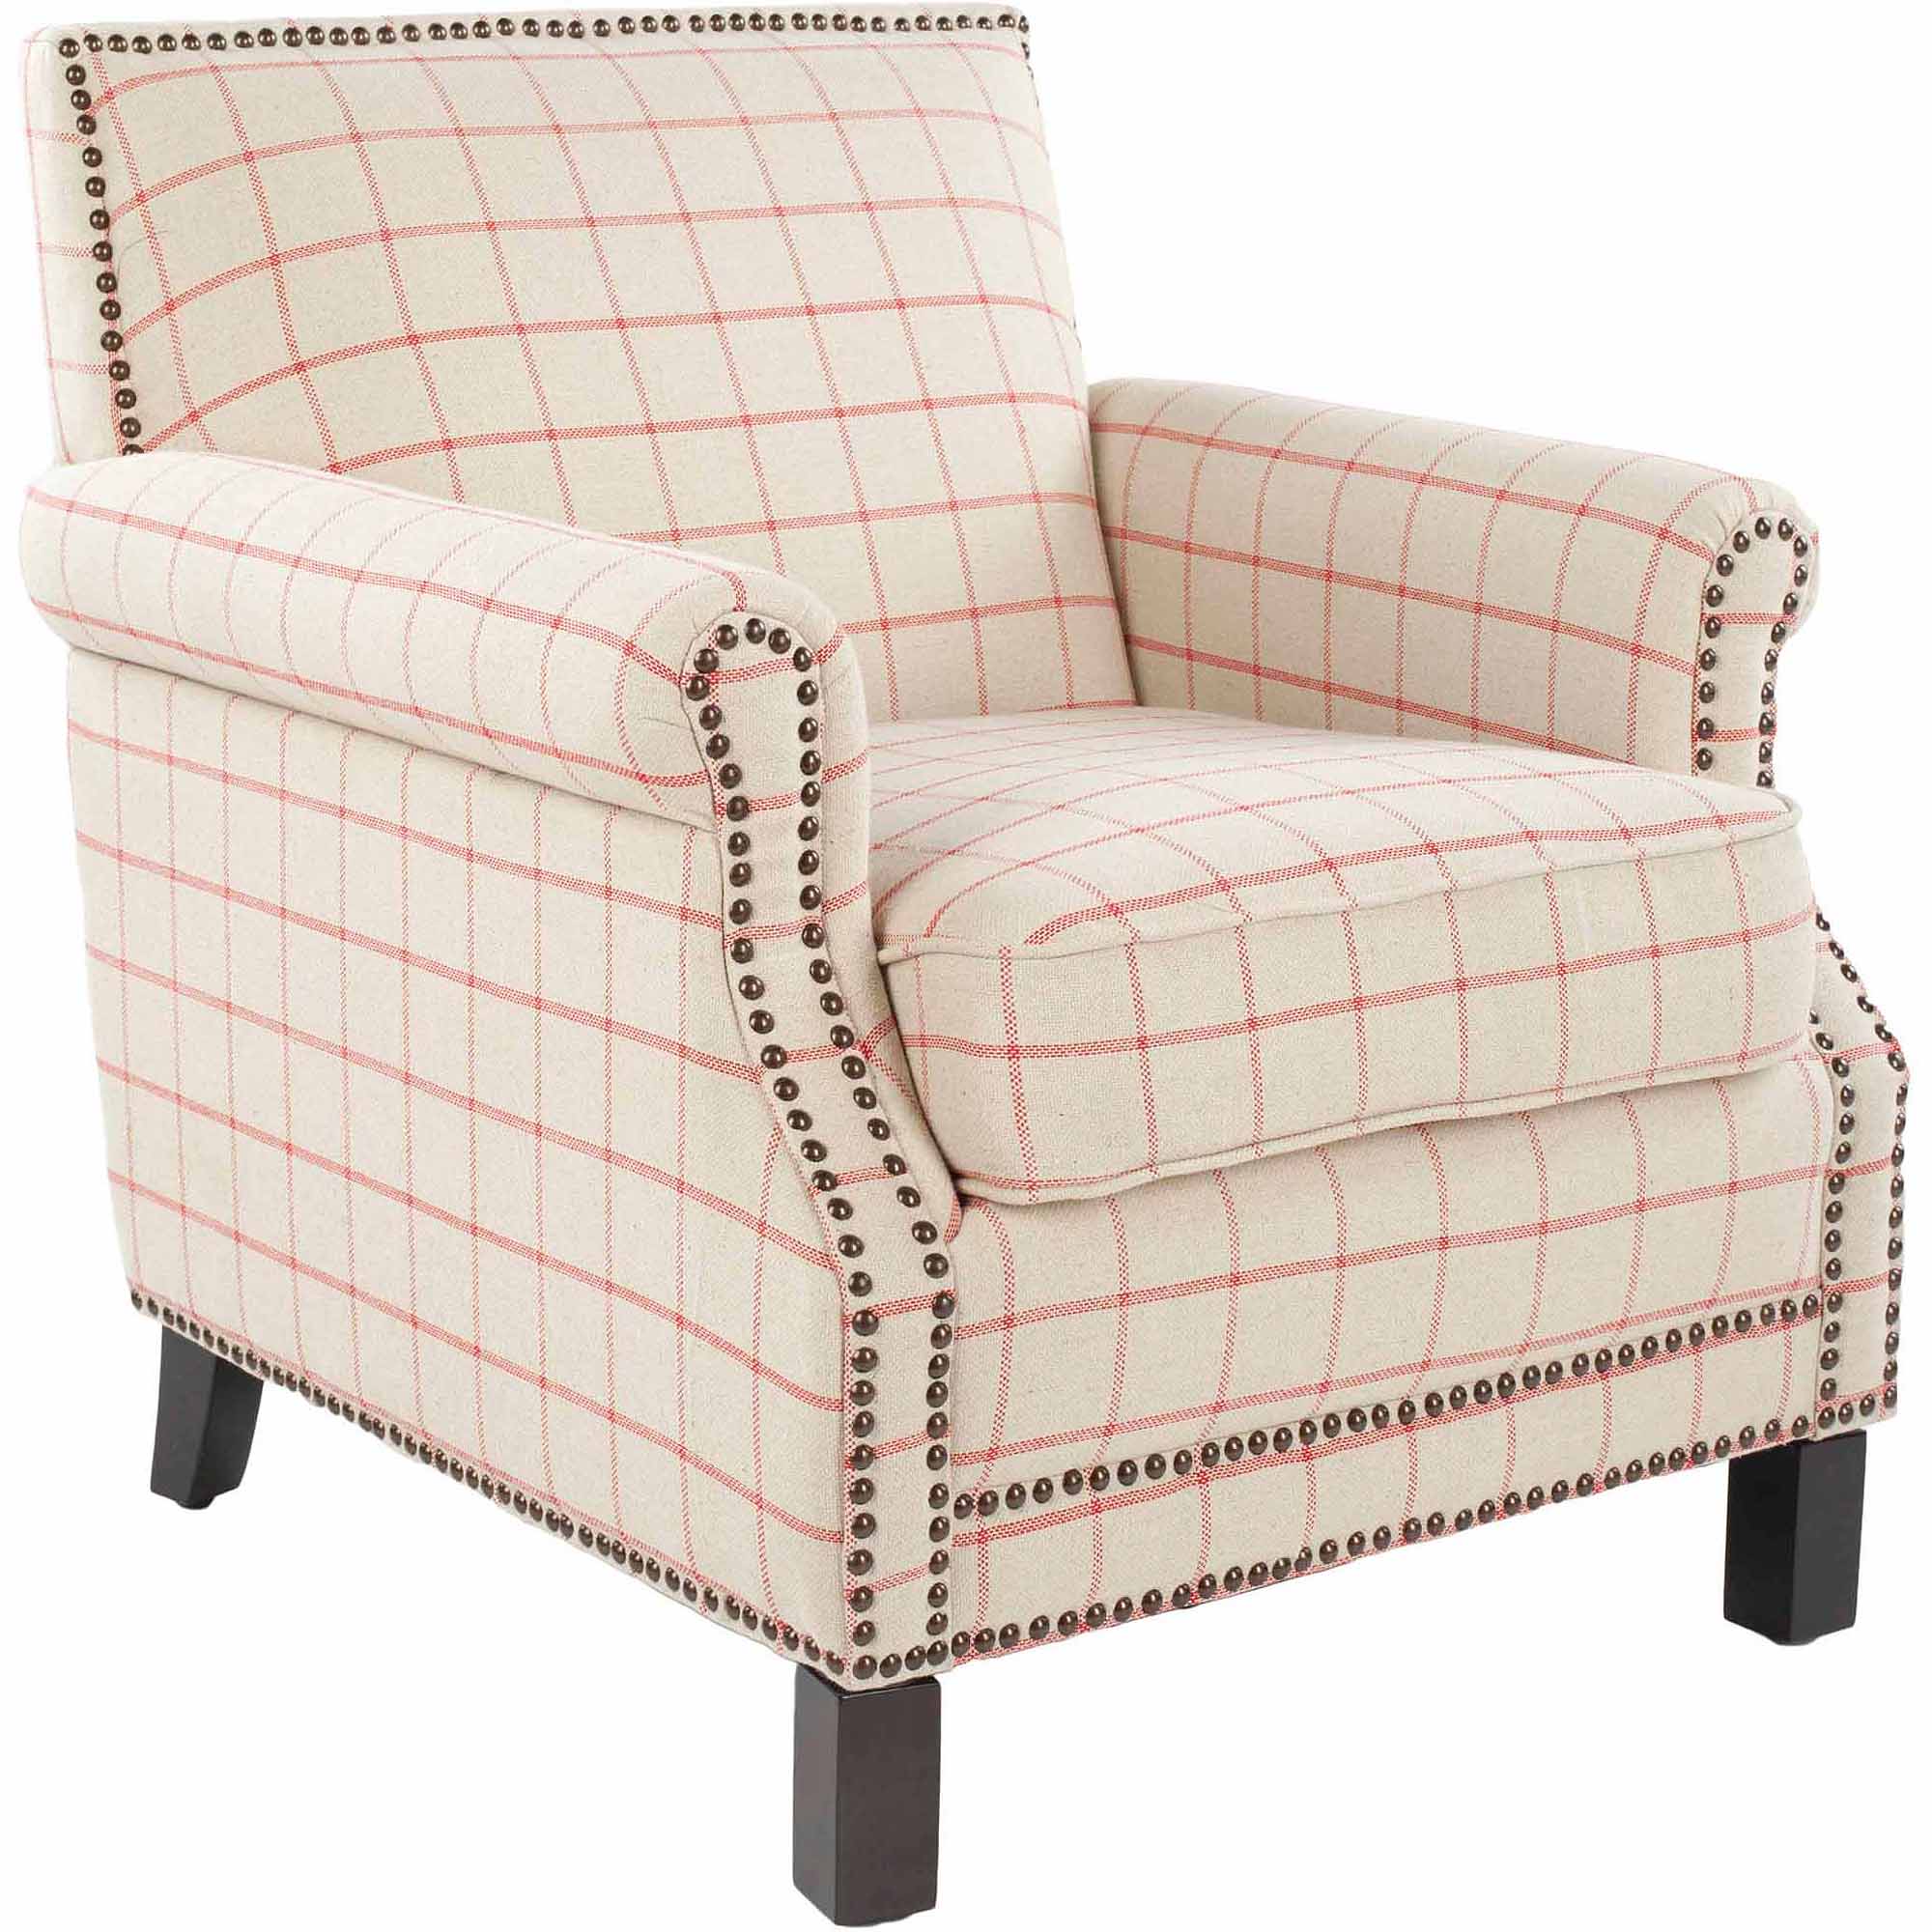 SAFAVIEH Easton Rustic Glam Upholstered Club Chair w/ Nailheads, Taupe/Orange - image 3 of 4